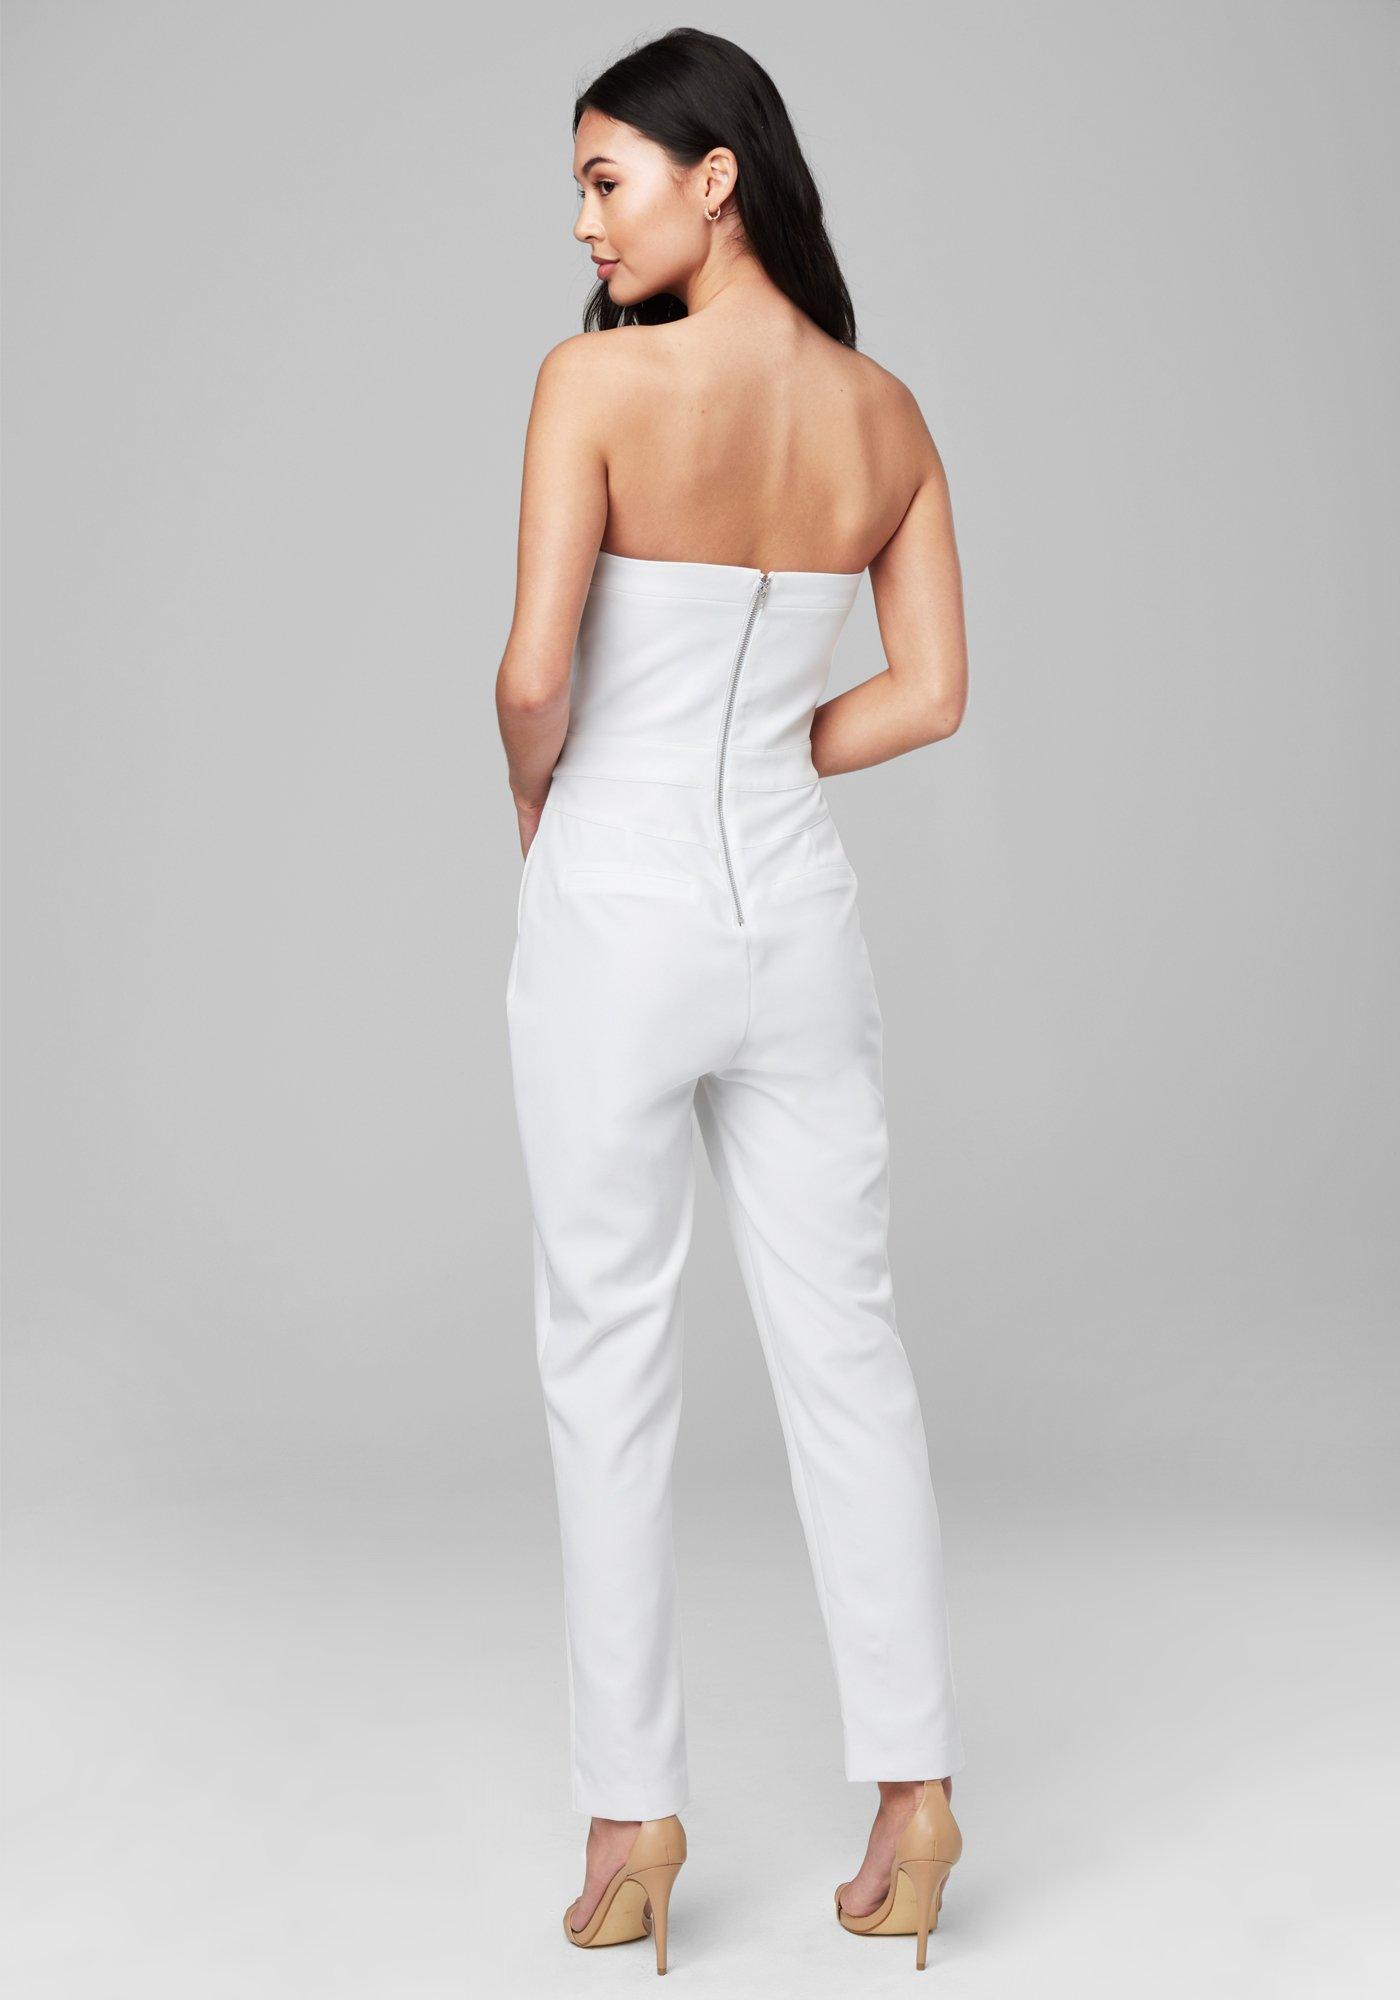 Bebe Synthetic Strapless Bustier Jumpsuit In Bright White White Lyst